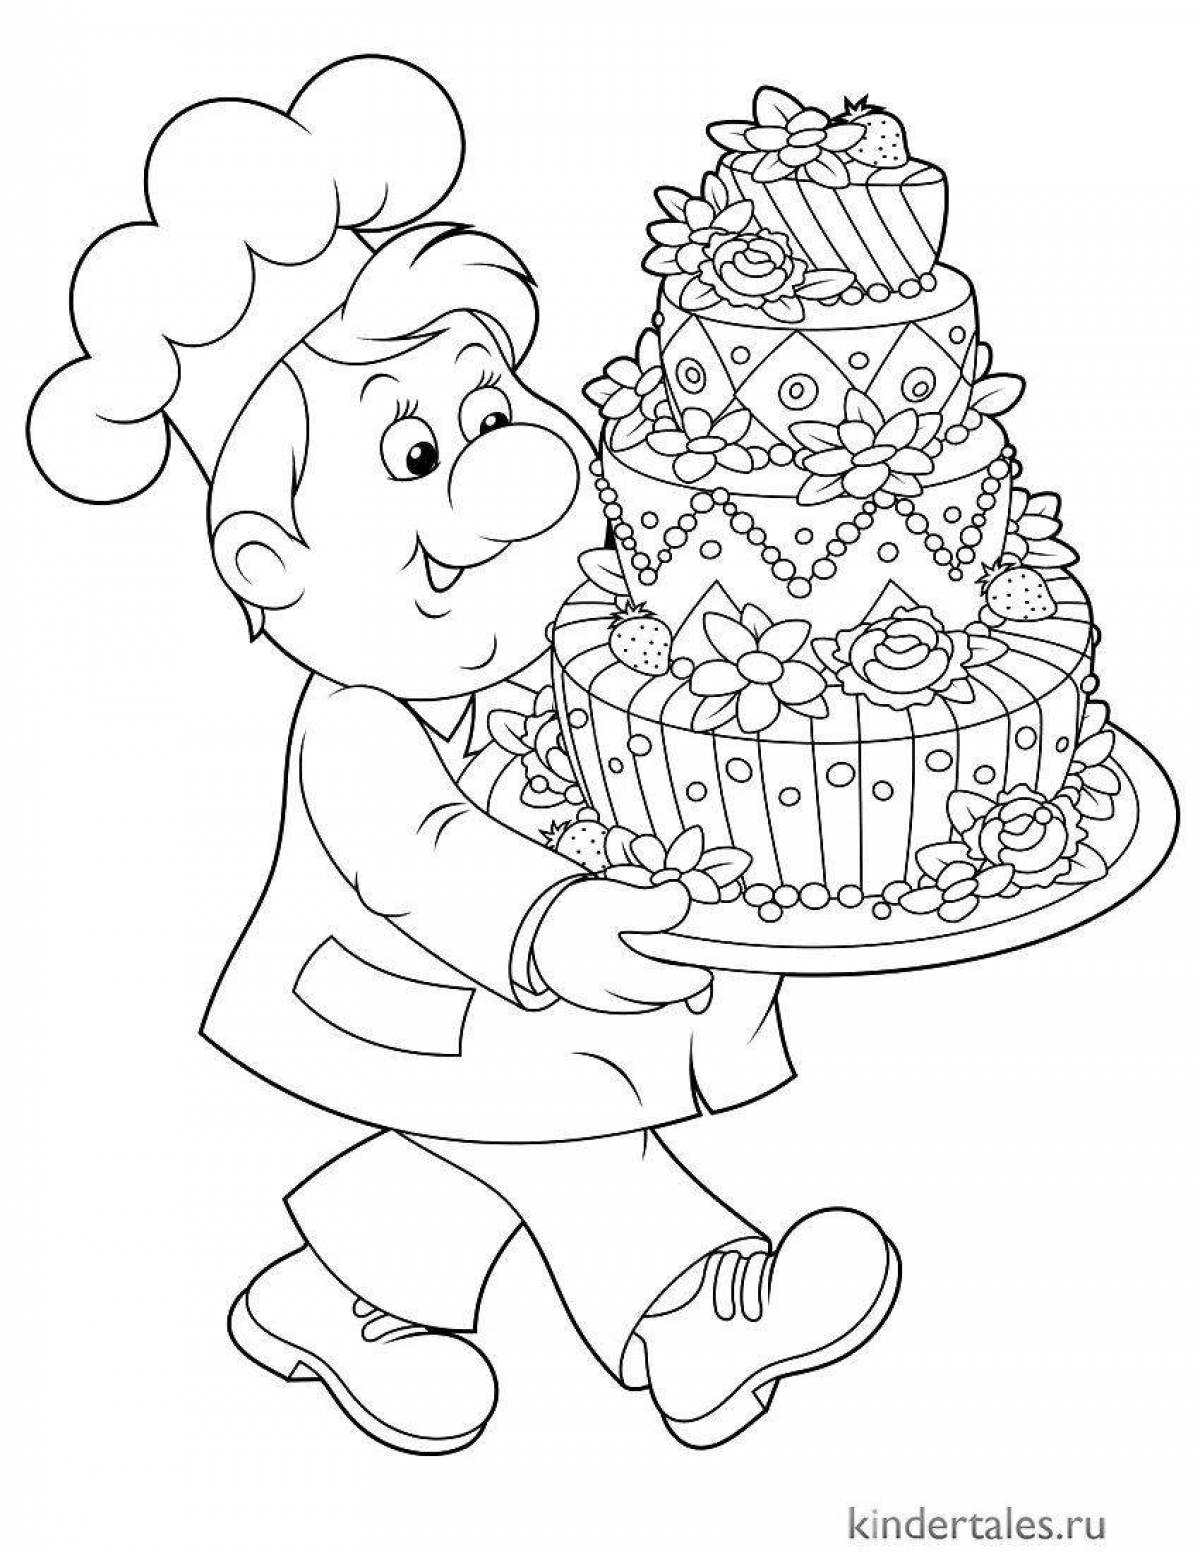 Colorful confectioner coloring page for kids